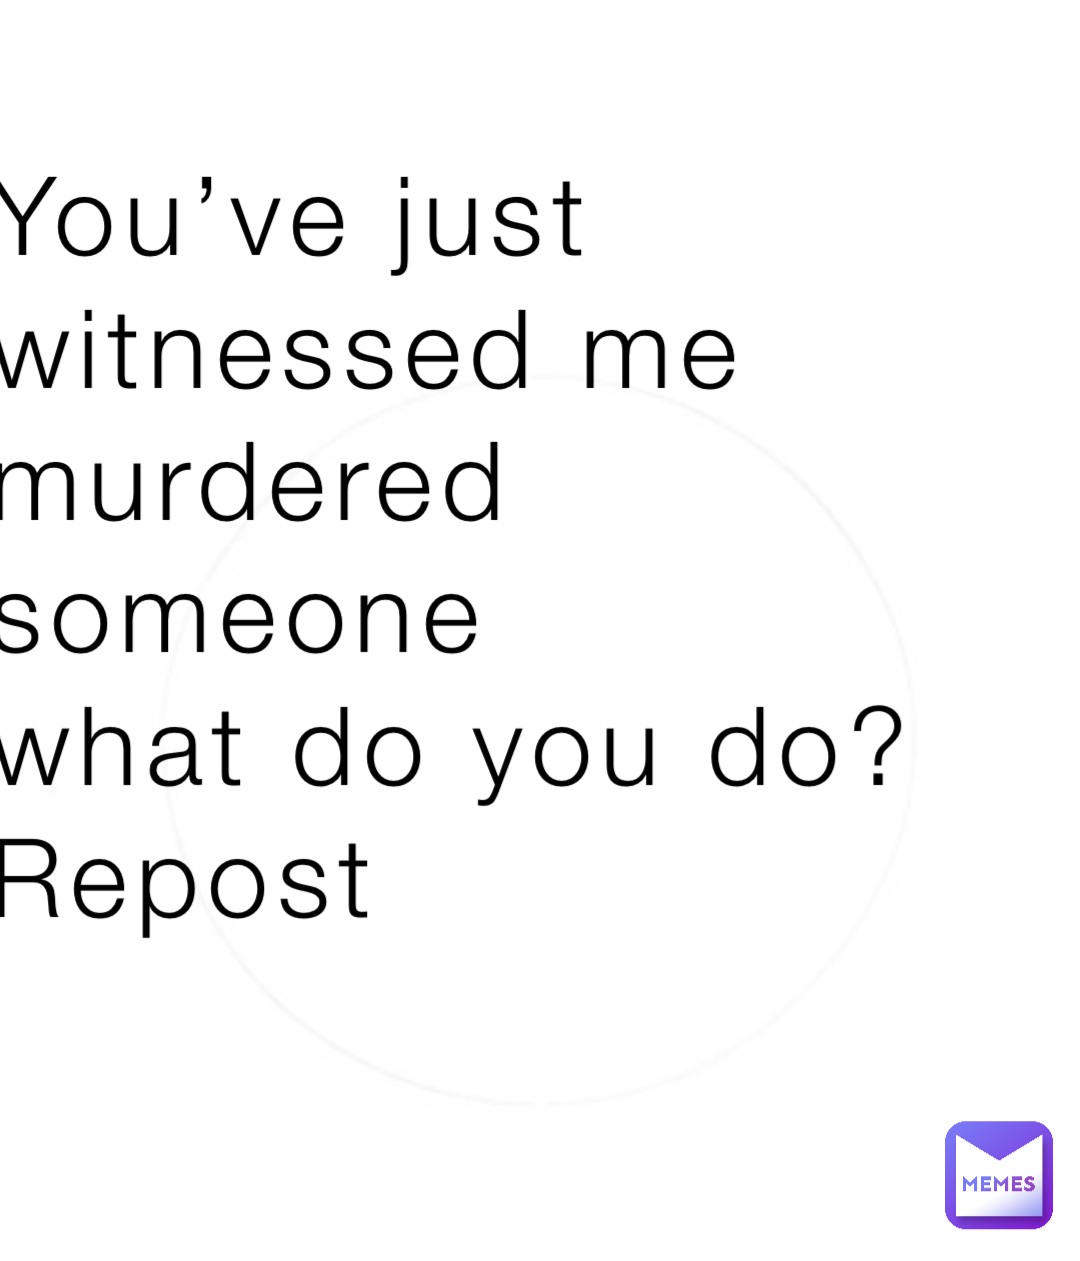 You’ve just
witnessed me 
murdered 
someone 
what do you do?
Repost